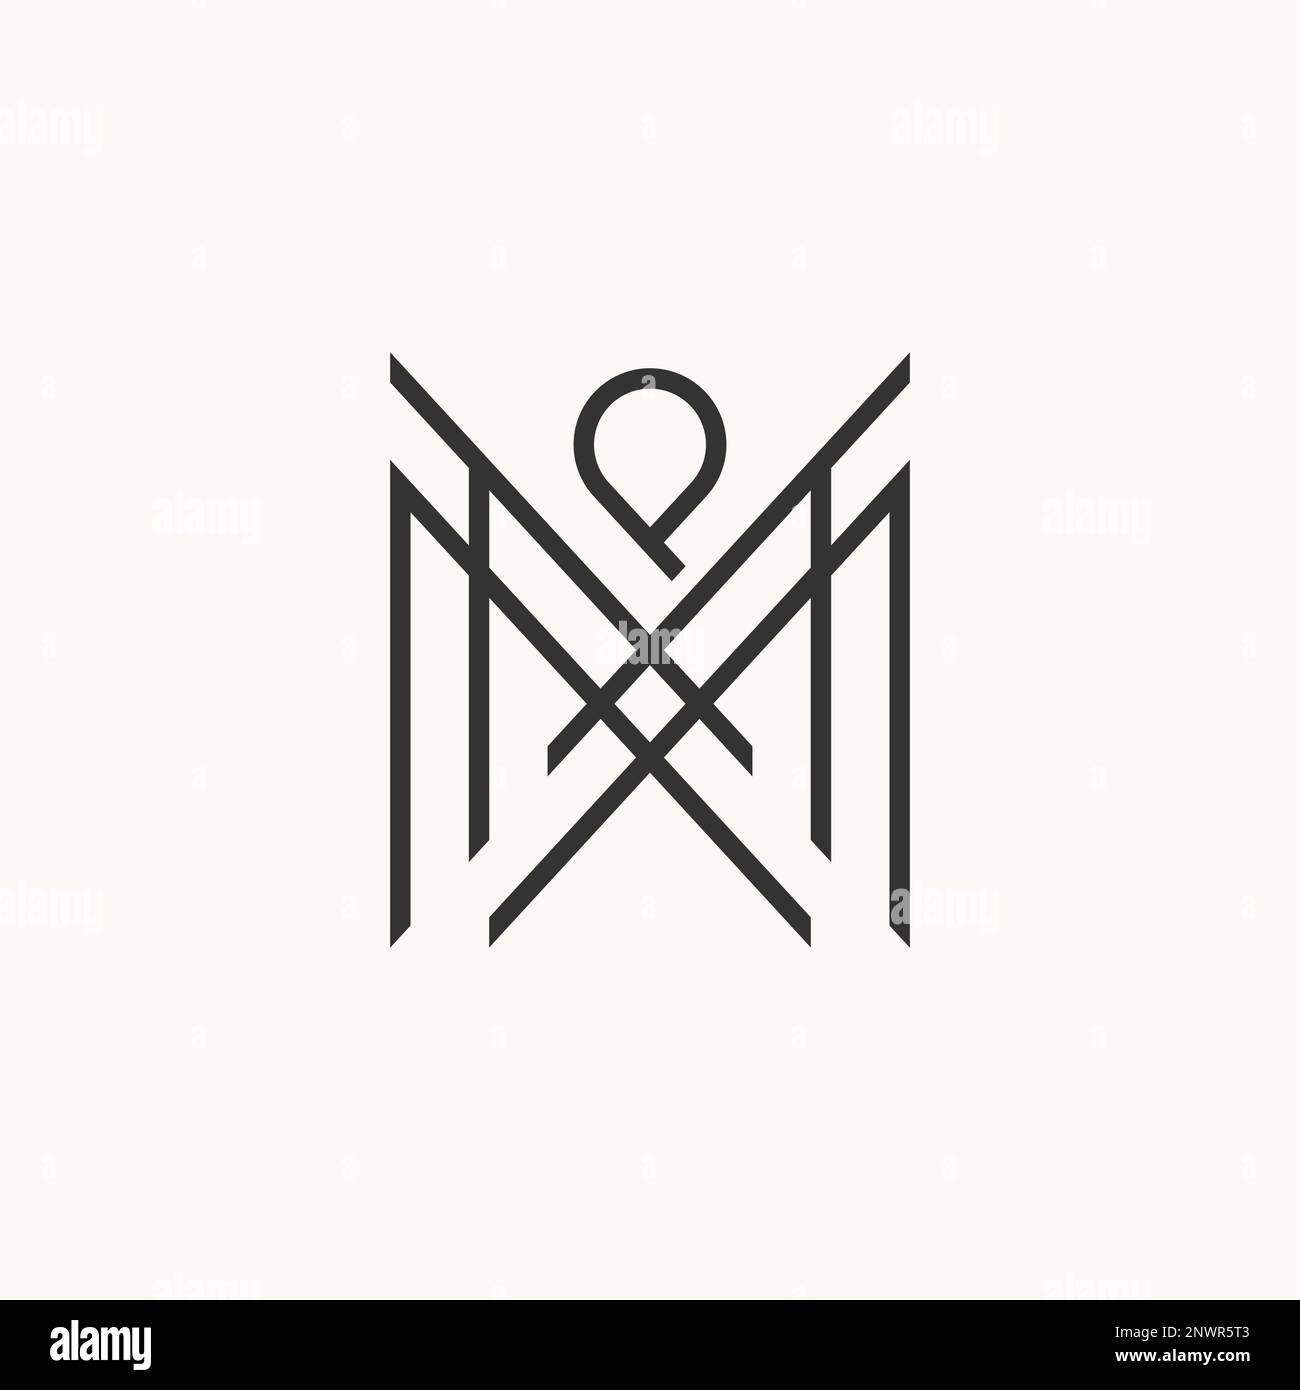 Initial letter PM monogram logo with abstract house shape, simple